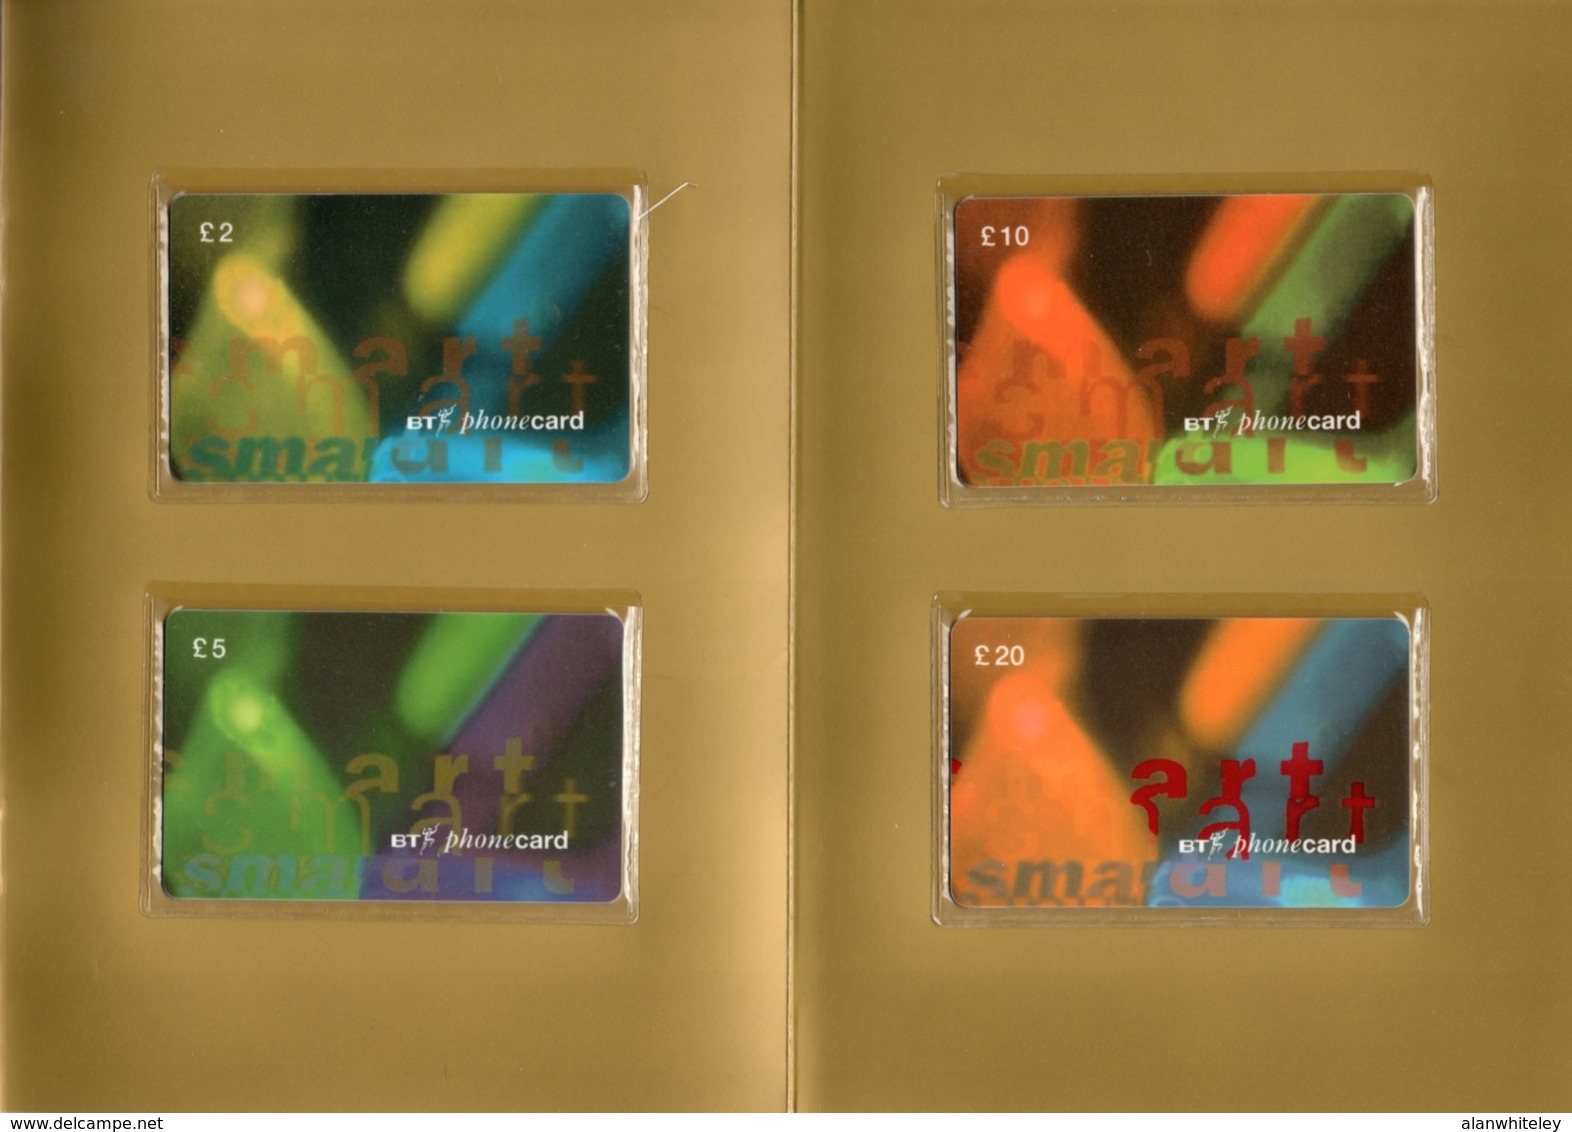 GREAT BRITAIN 1995 Smart Card Trial/Thank You: Presentation Pack Containing 4 Phonecards MINT/UNUSED - BT Test & Proef